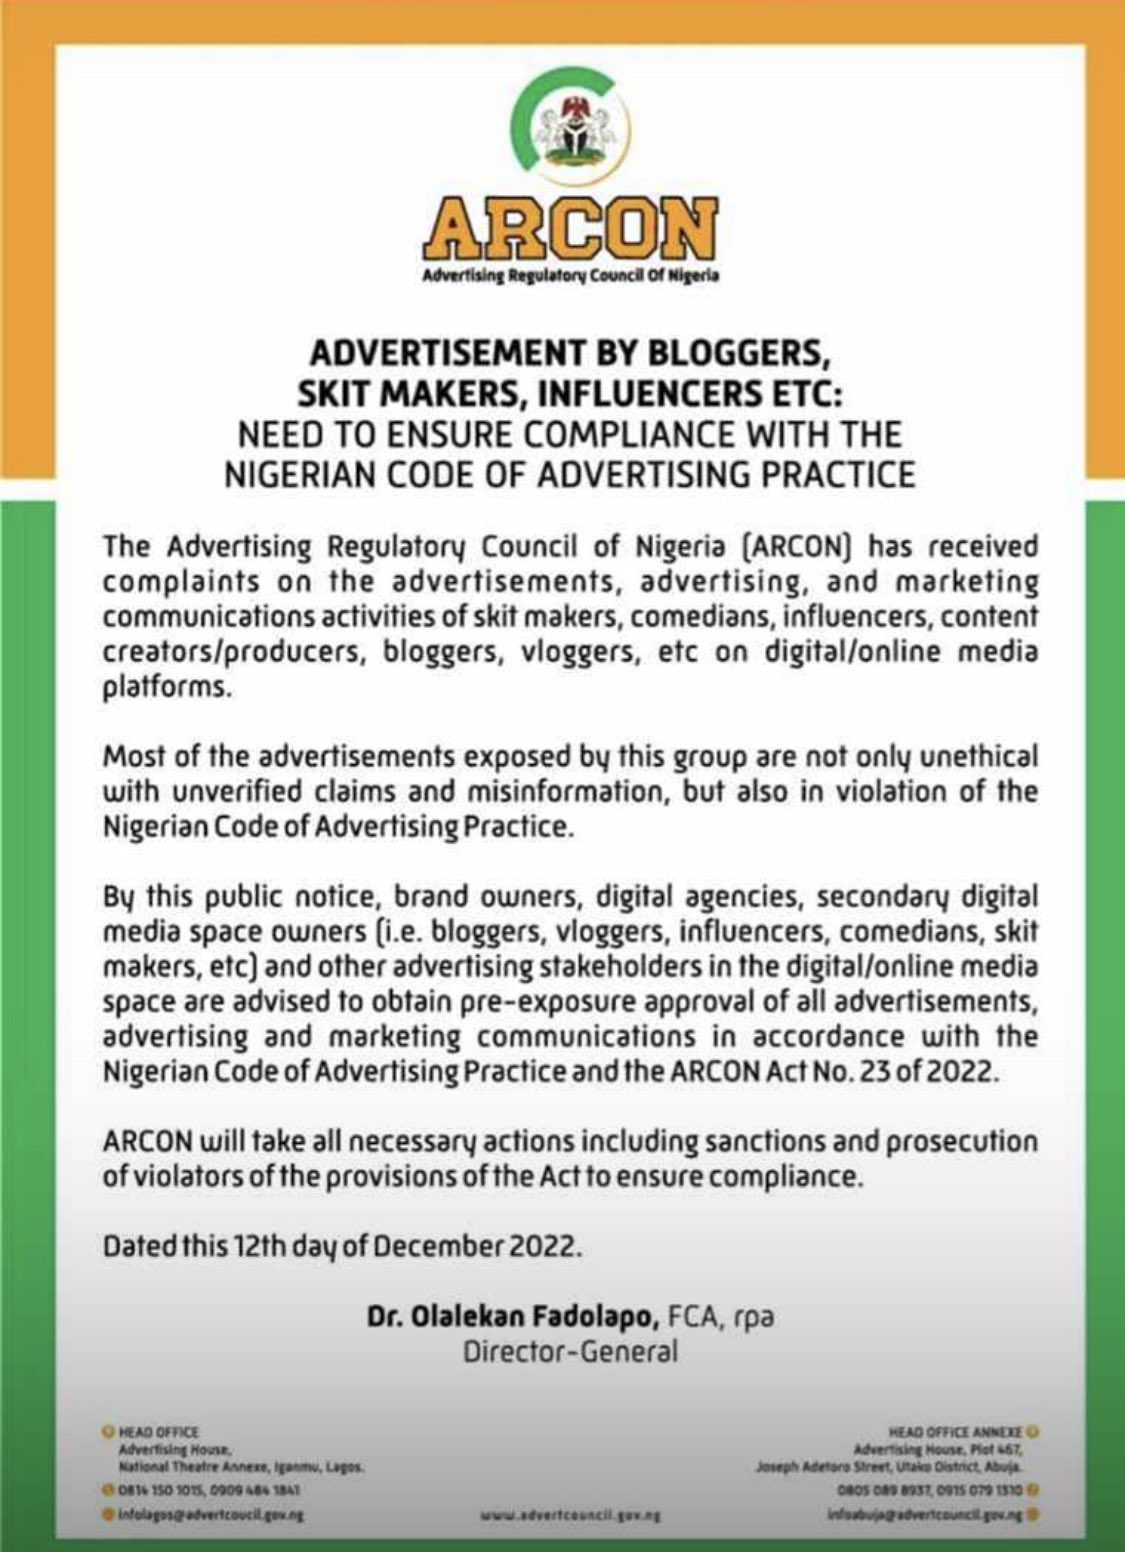 Nigerians react to ARCON ordering skit makers, influencers, bloggers, to seek approval for all adverts